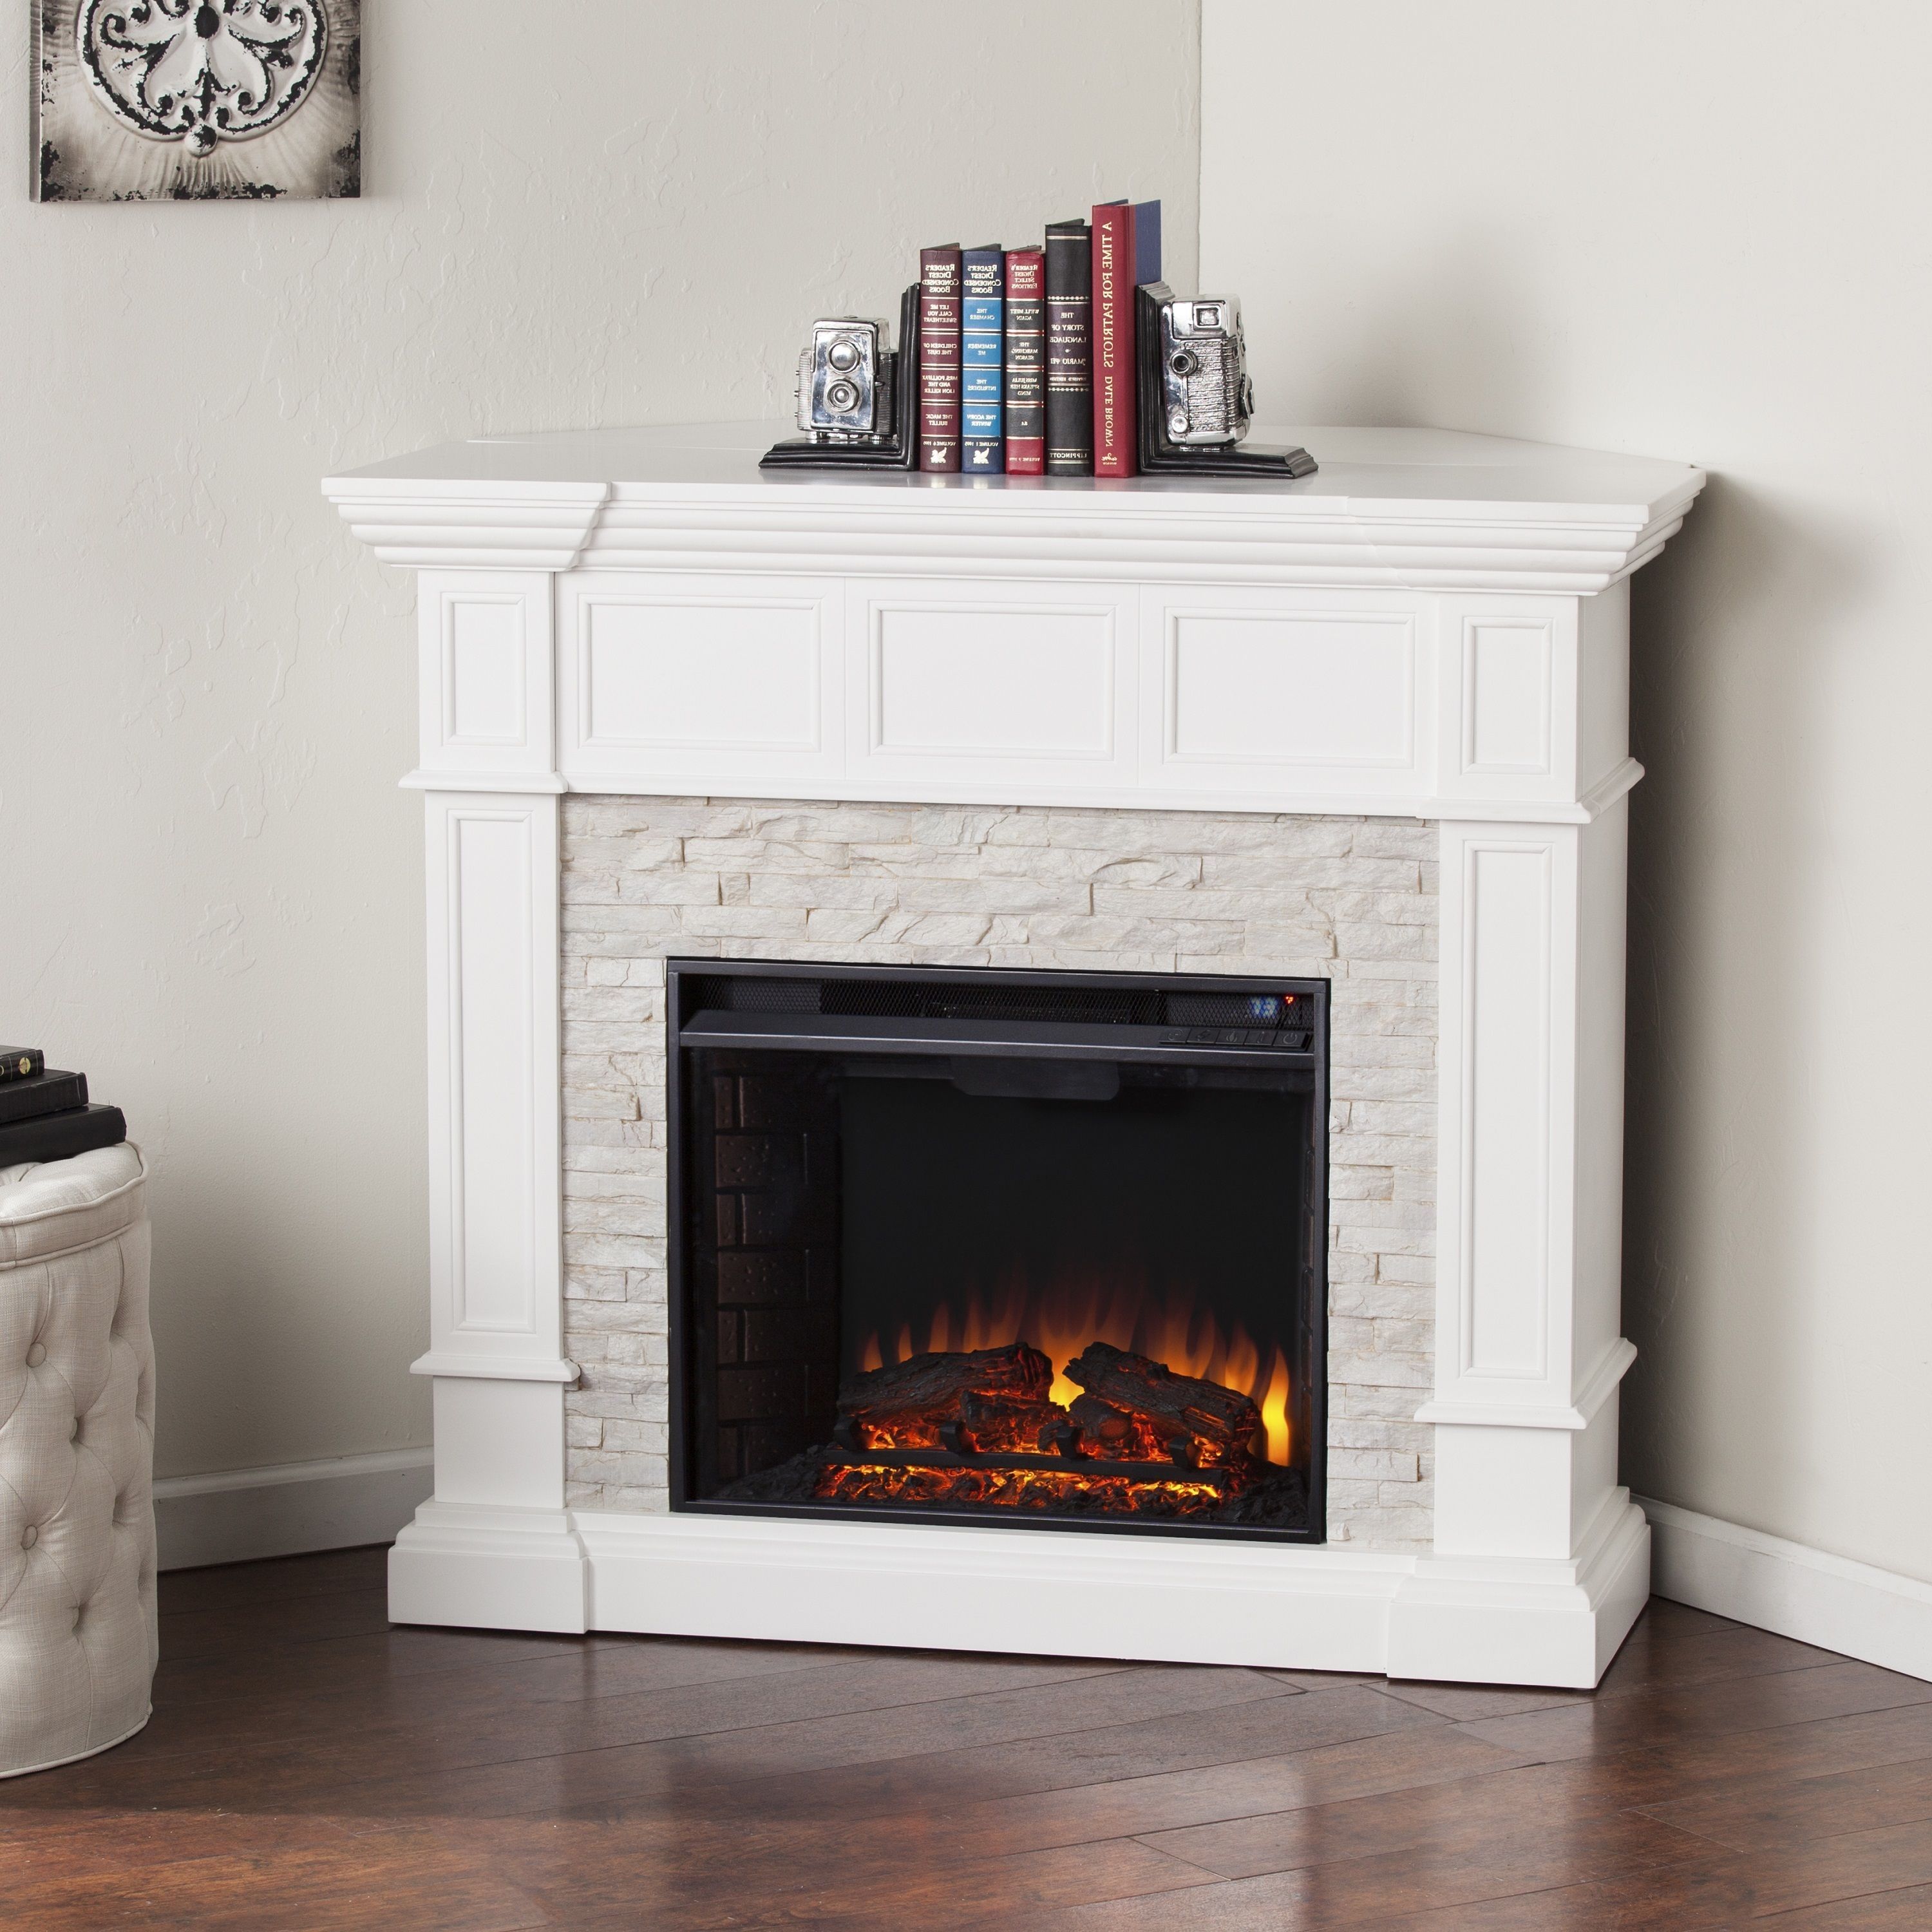 Fireplace Pilaster Fresh 33 Modern and Traditional Corner Fireplace Ideas Remodel